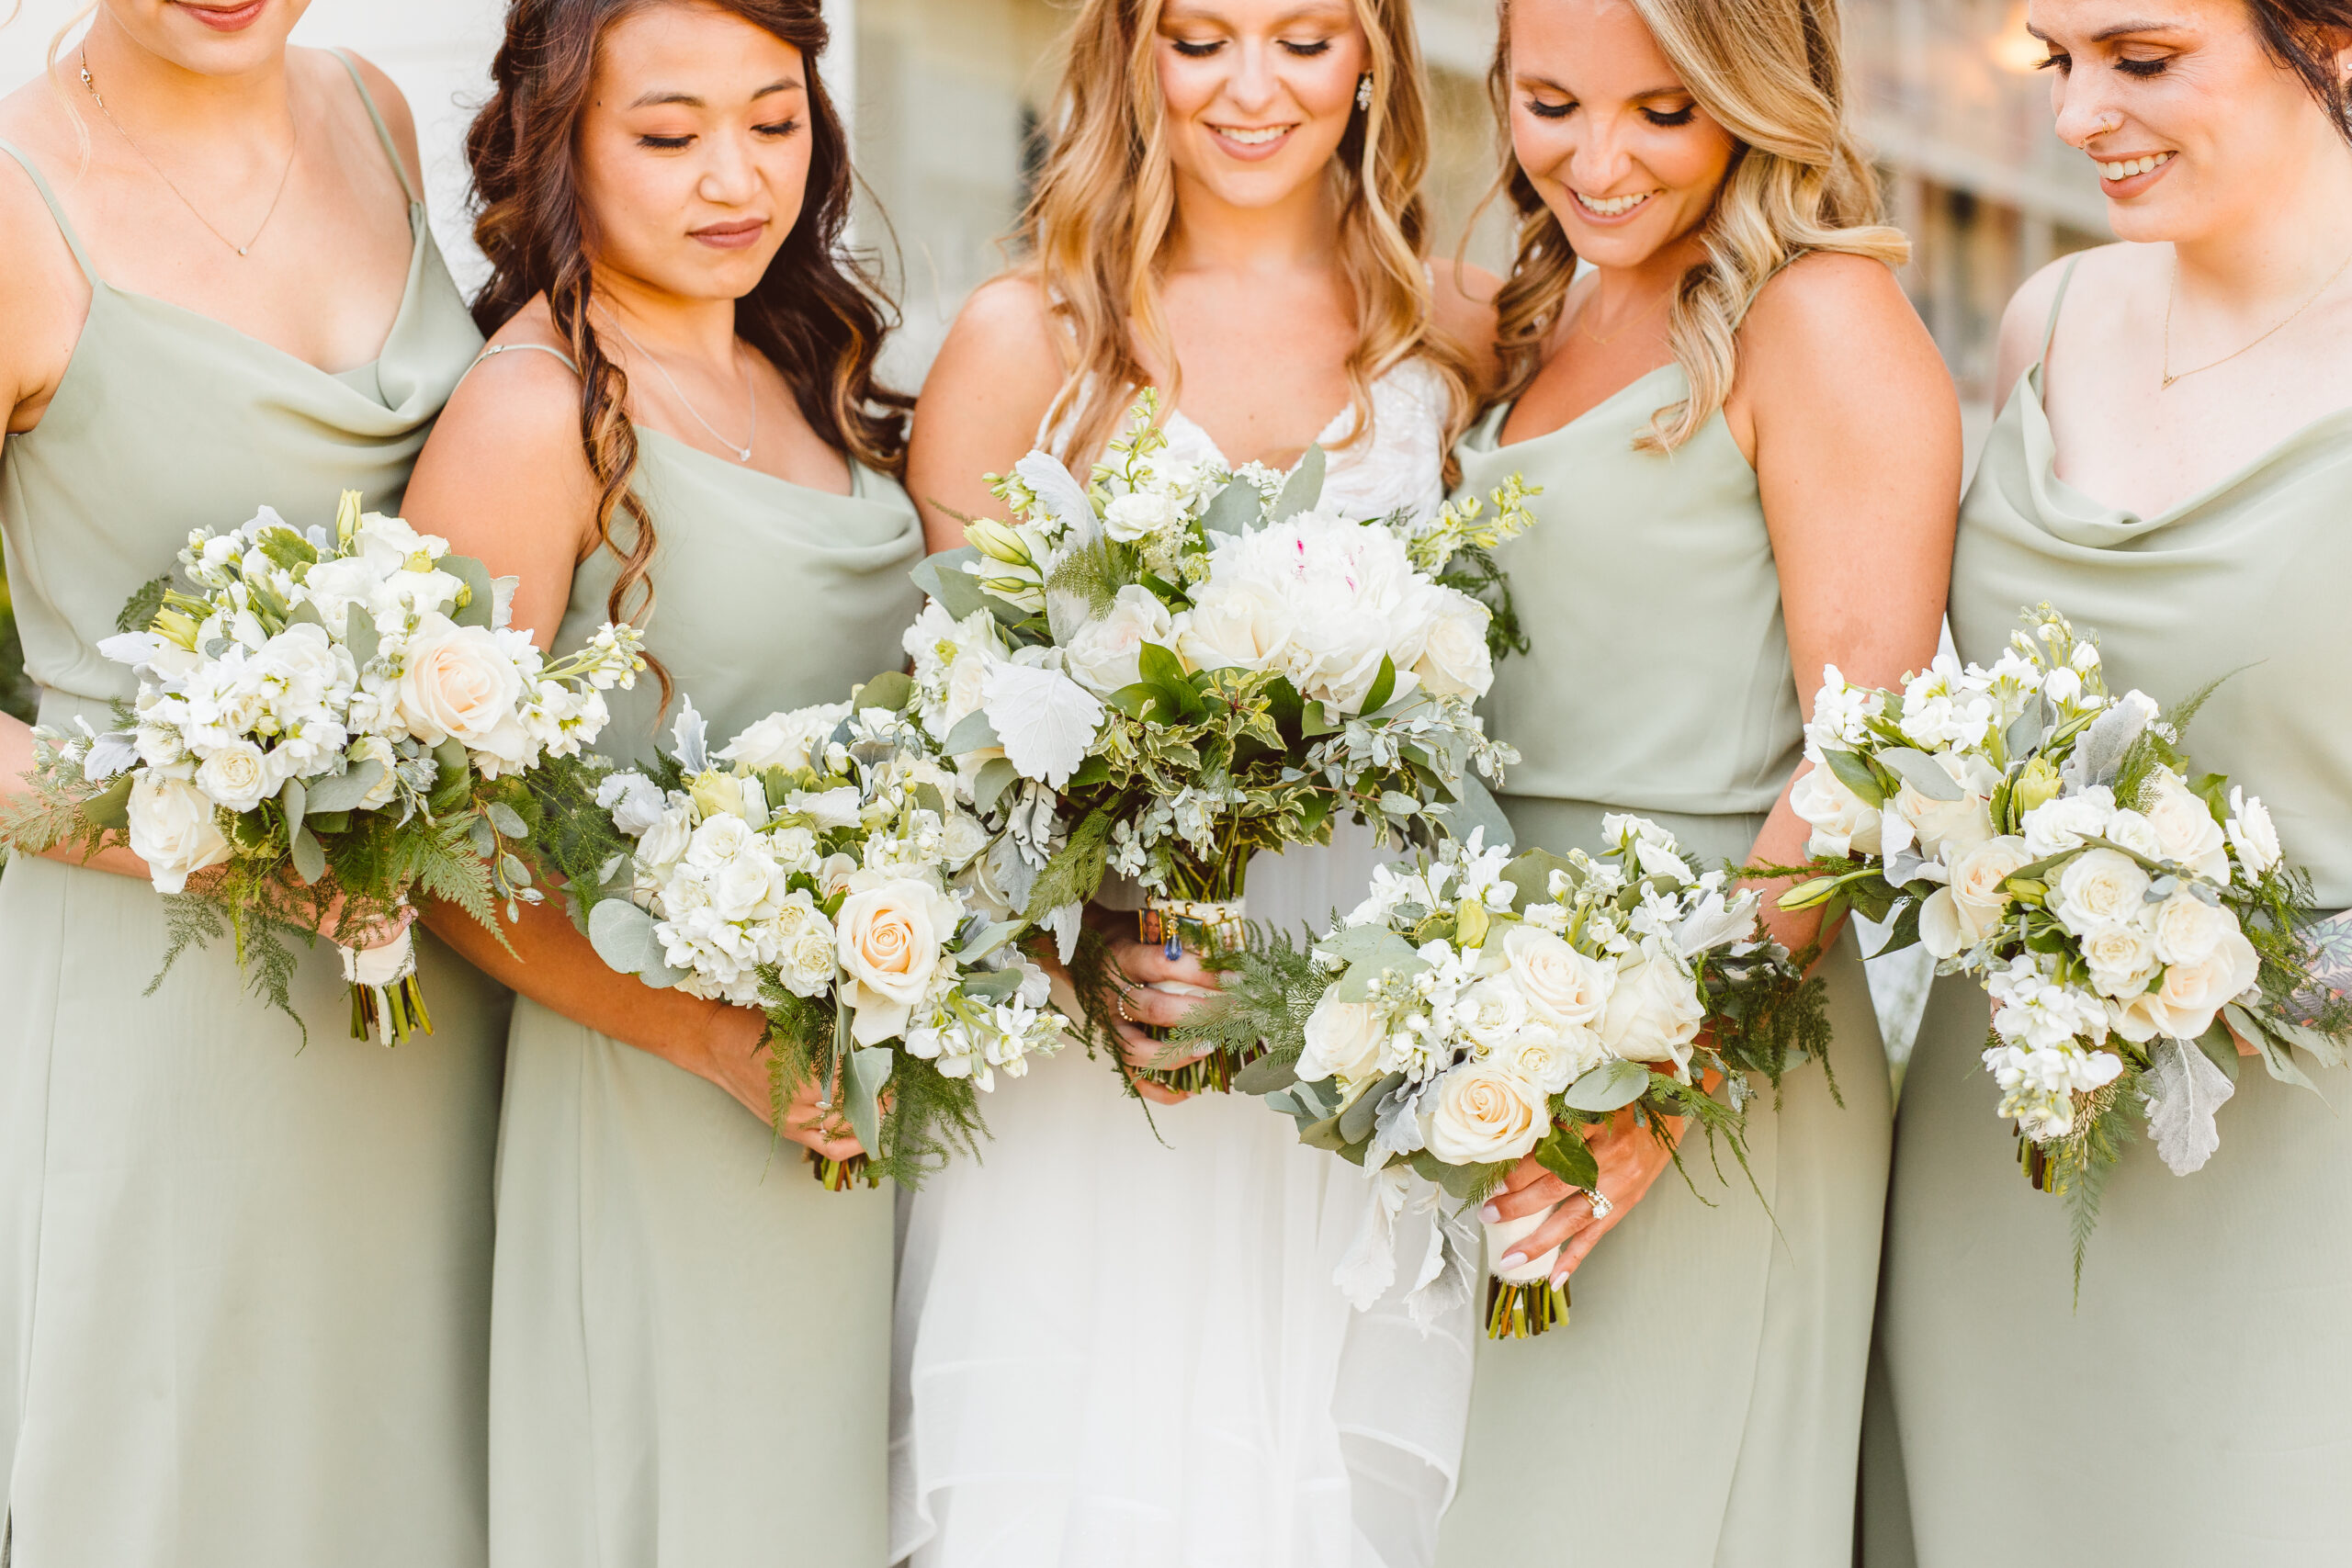 Bride and bridesmaids portraits from Maryland Wedding at Wylder Hotel Tilghman Island